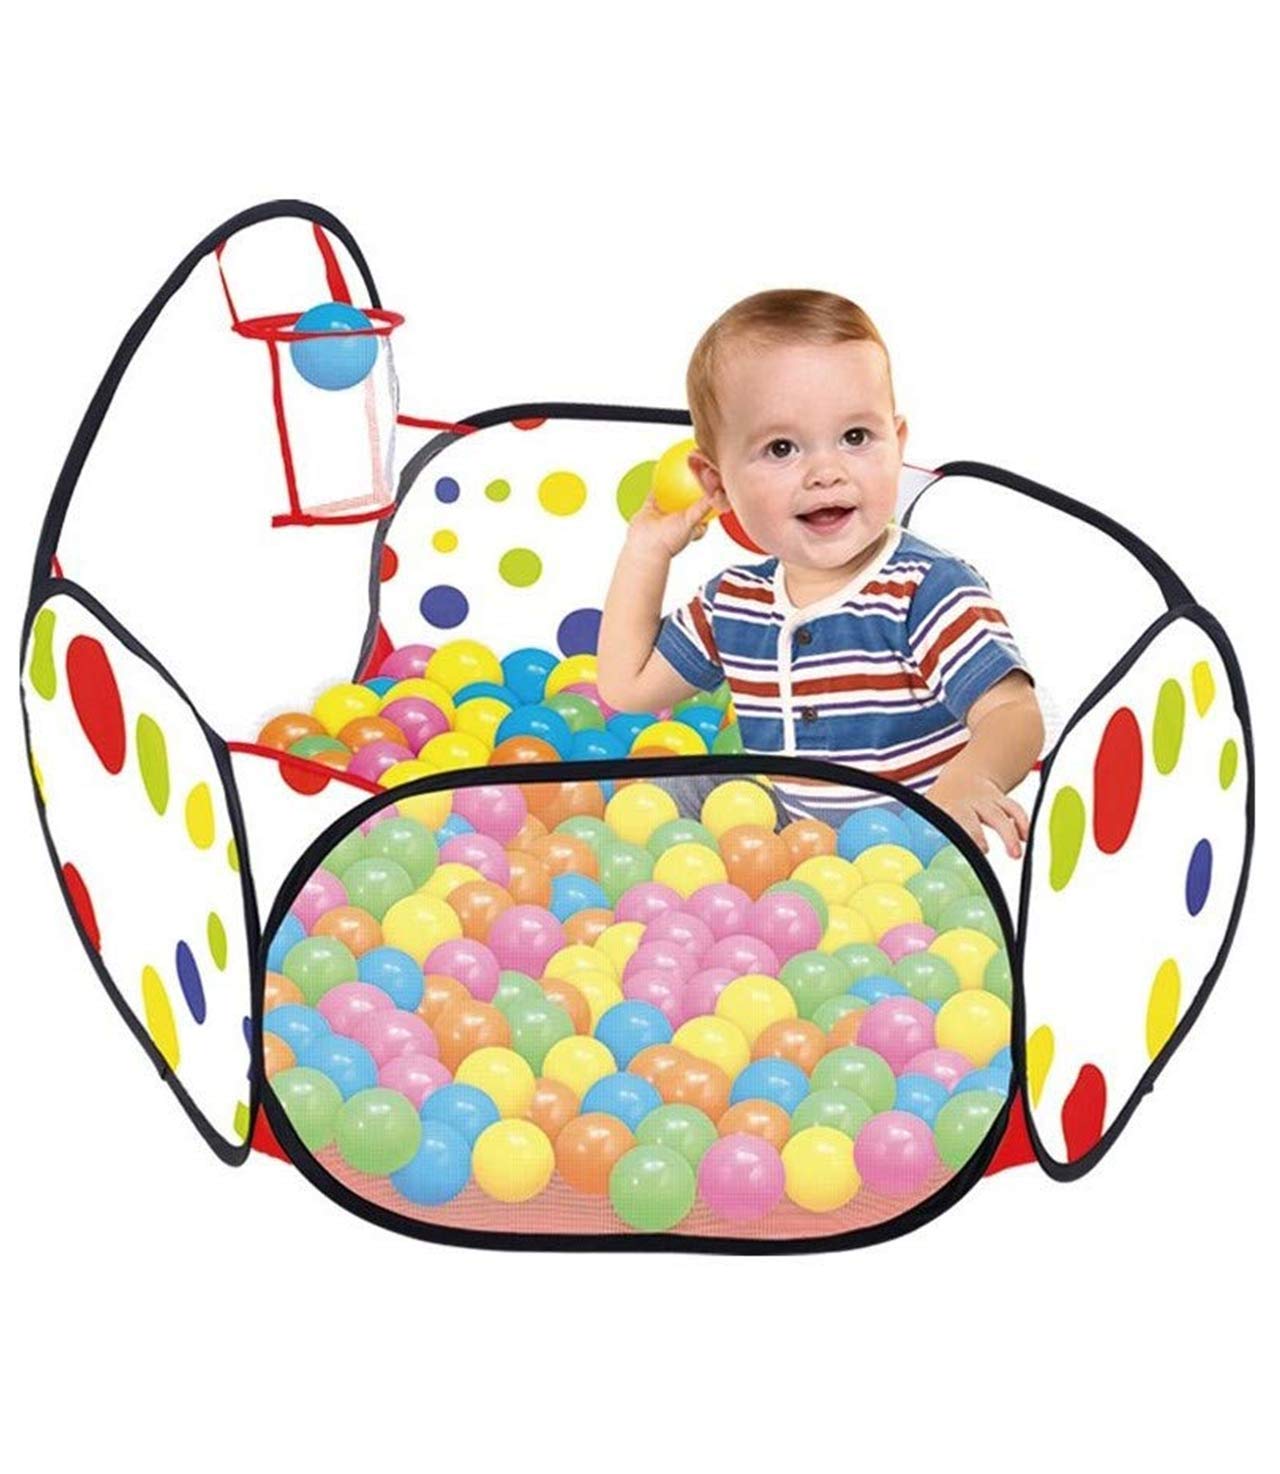 Foldable Basket Ball Pool Activity Toy for Indoor and Outdoor